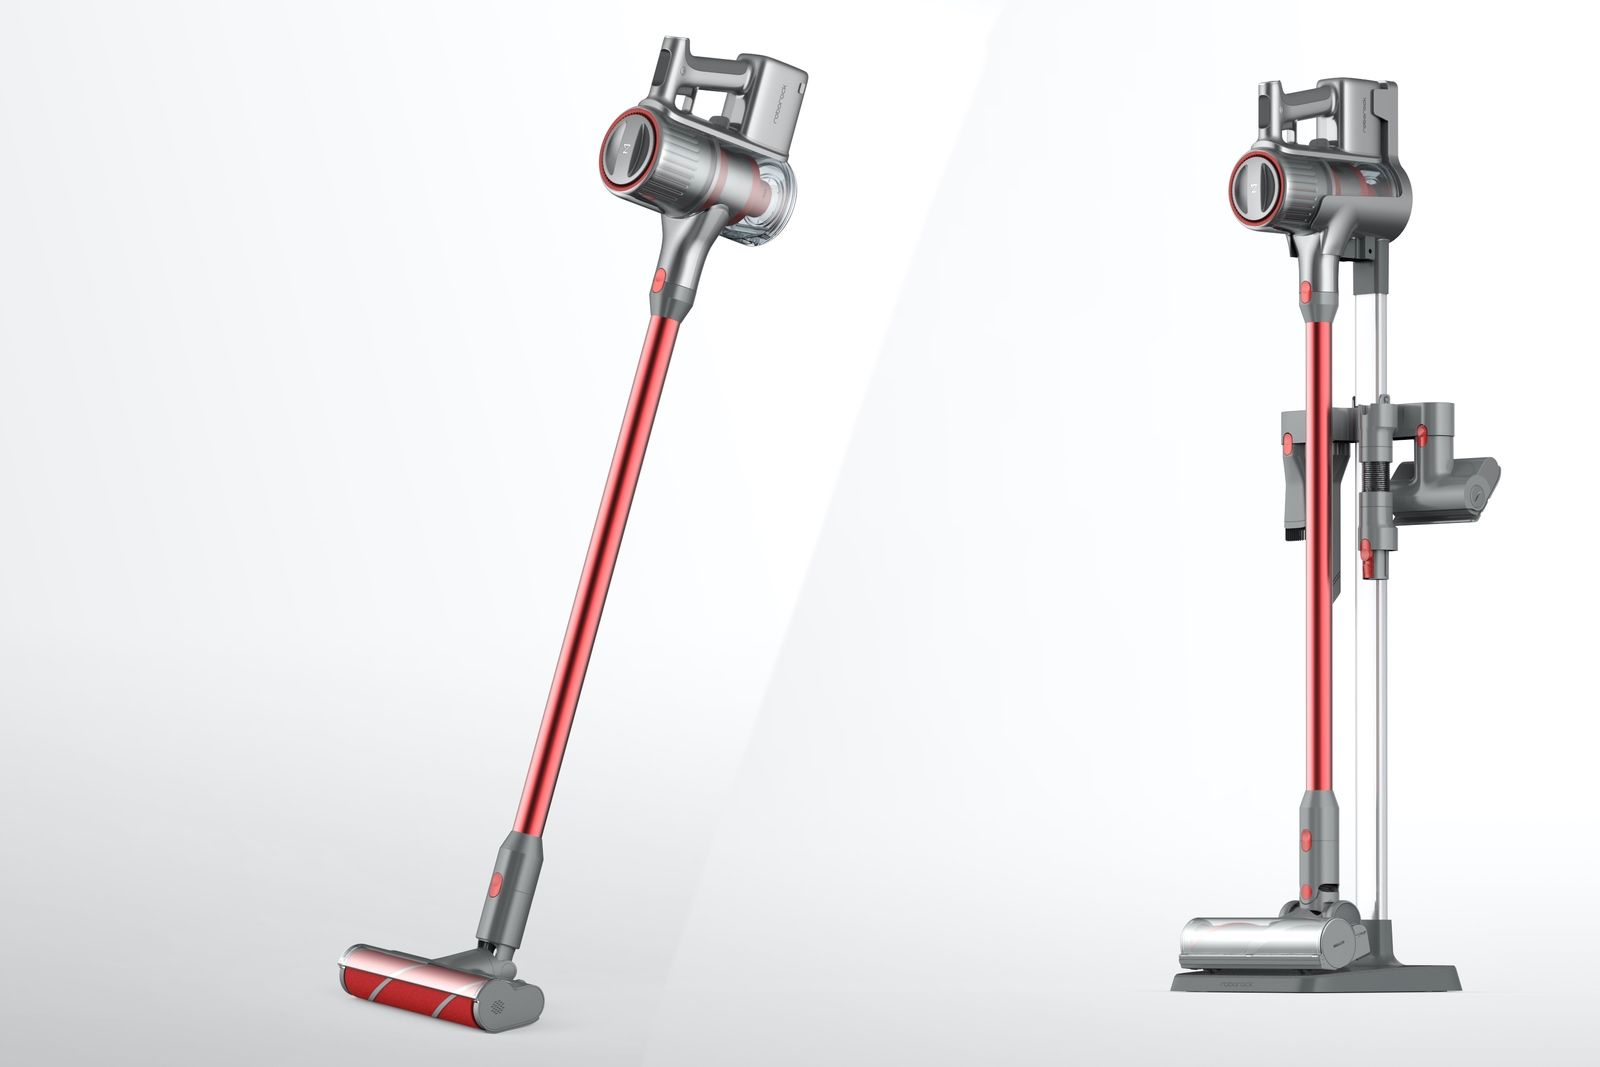 Roborock Makes Some Of The Best Value Vacuums You Can Buy - But Who Are They image 4